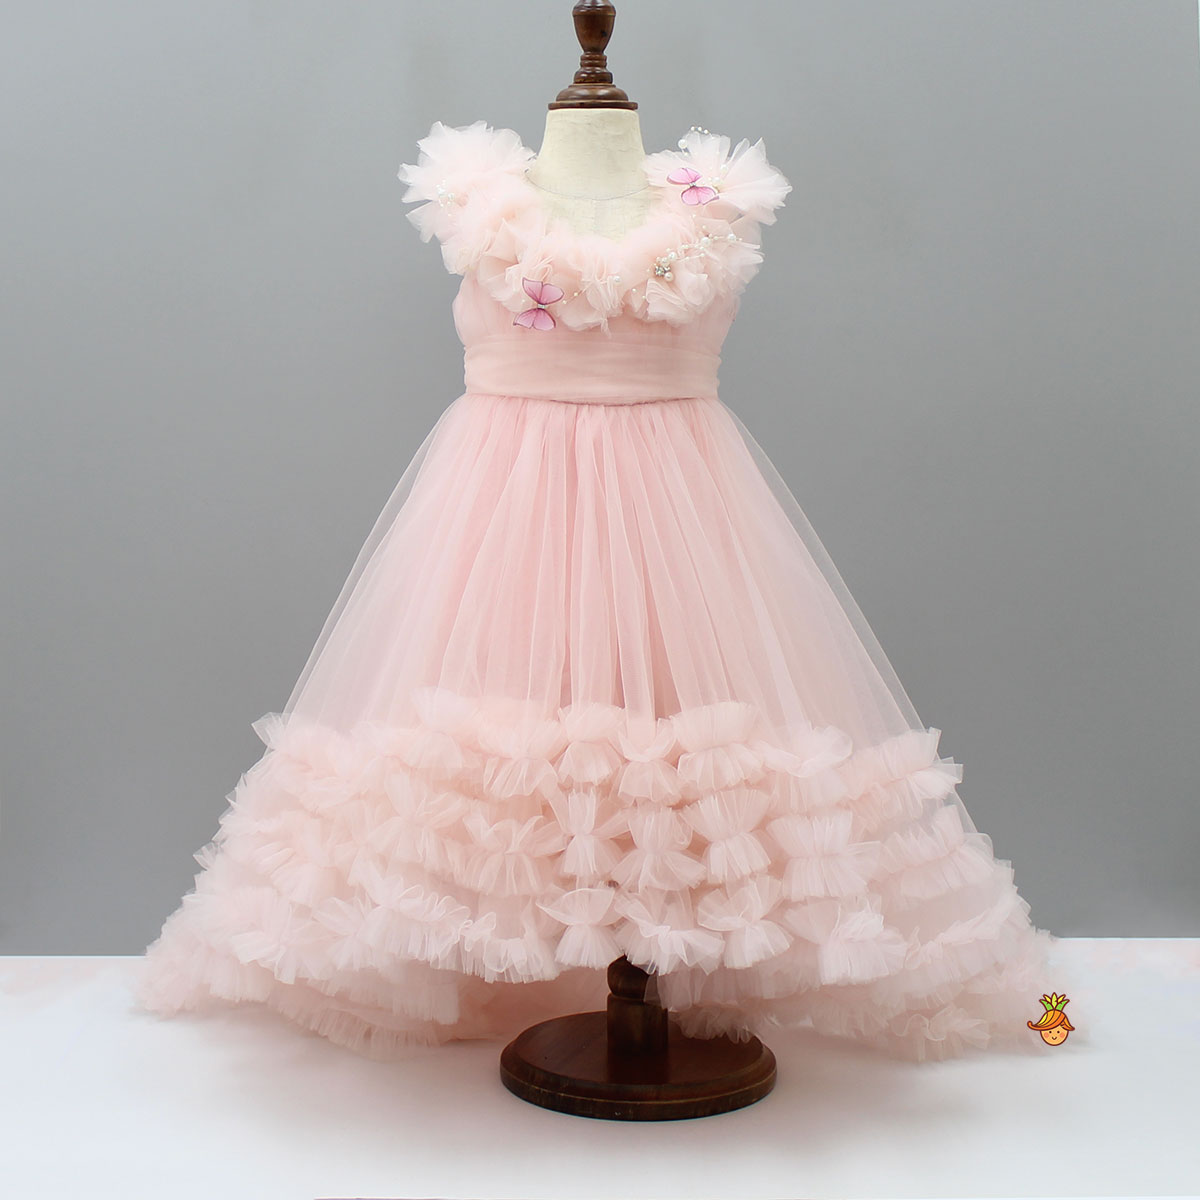 Pearls And Butterfly Embellished Ruffled Frilly High Low Dress